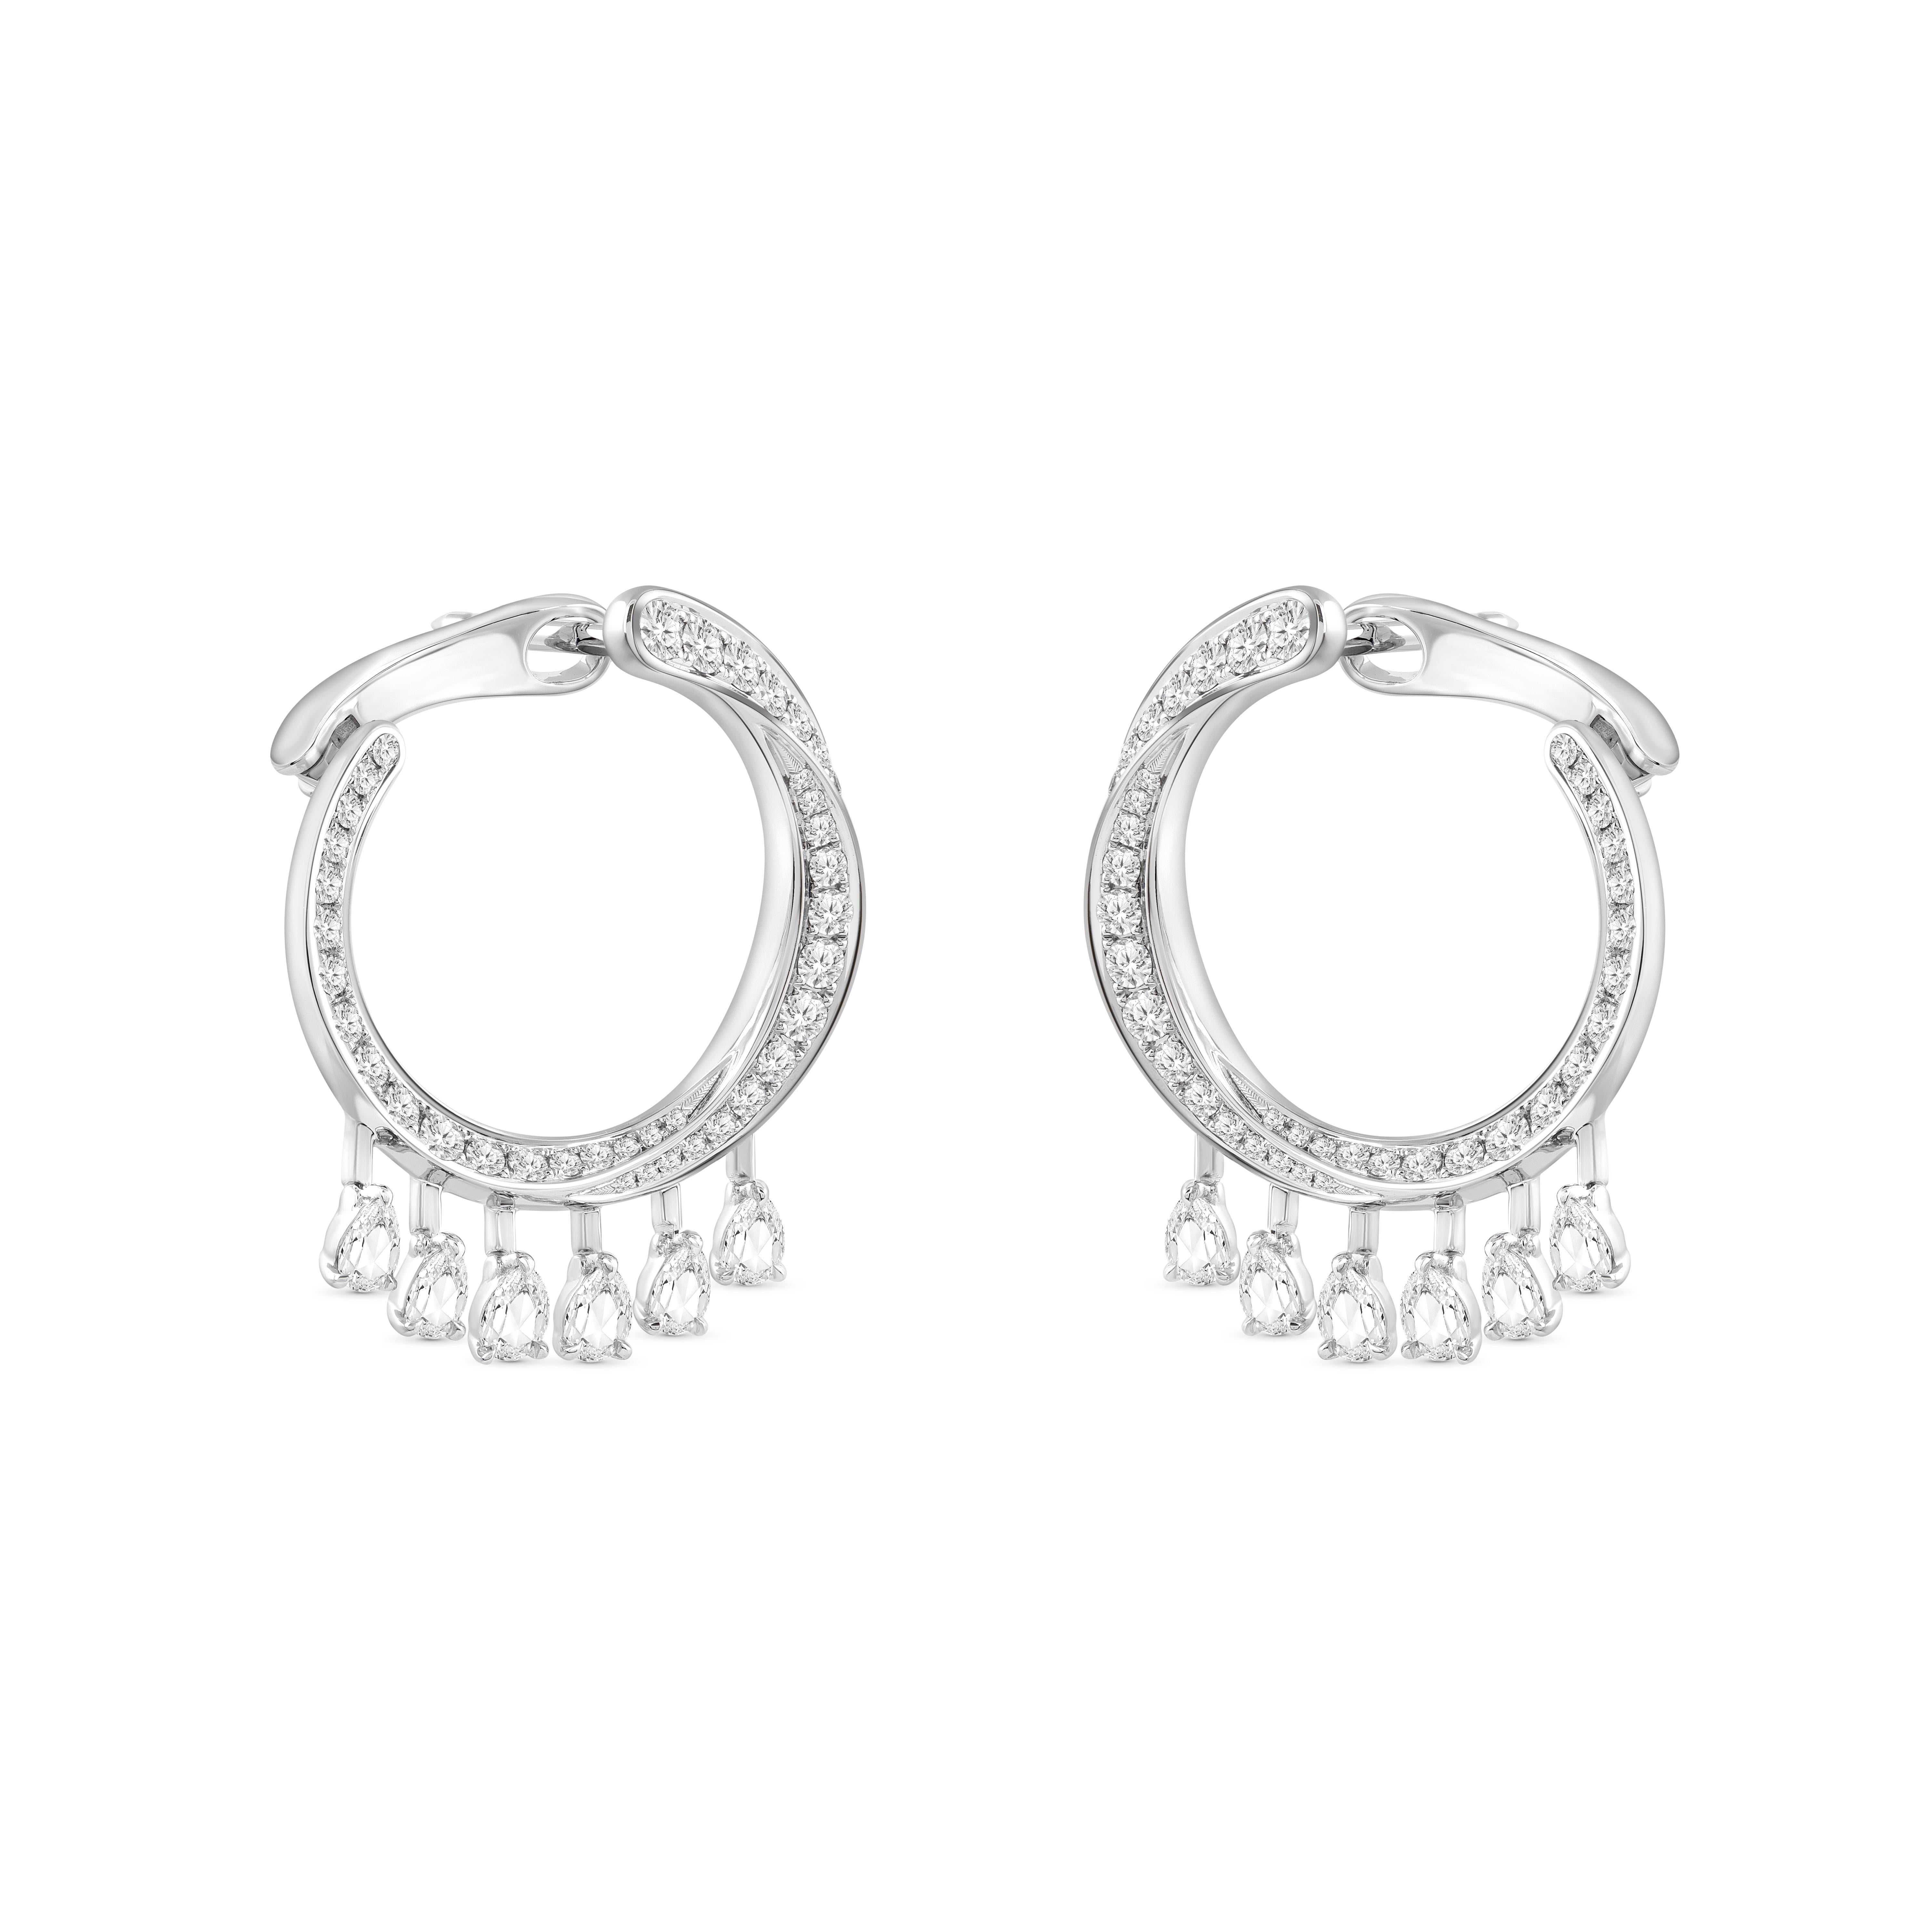 Inspired by the JOY of experiencing a gushing waterfall, these exquisite and elegant dangling earrings from the Cascade Collection are studded with 90 brilliant cut and 12 rose cut pear diamonds dripping delicately.

Beautifully designed, these